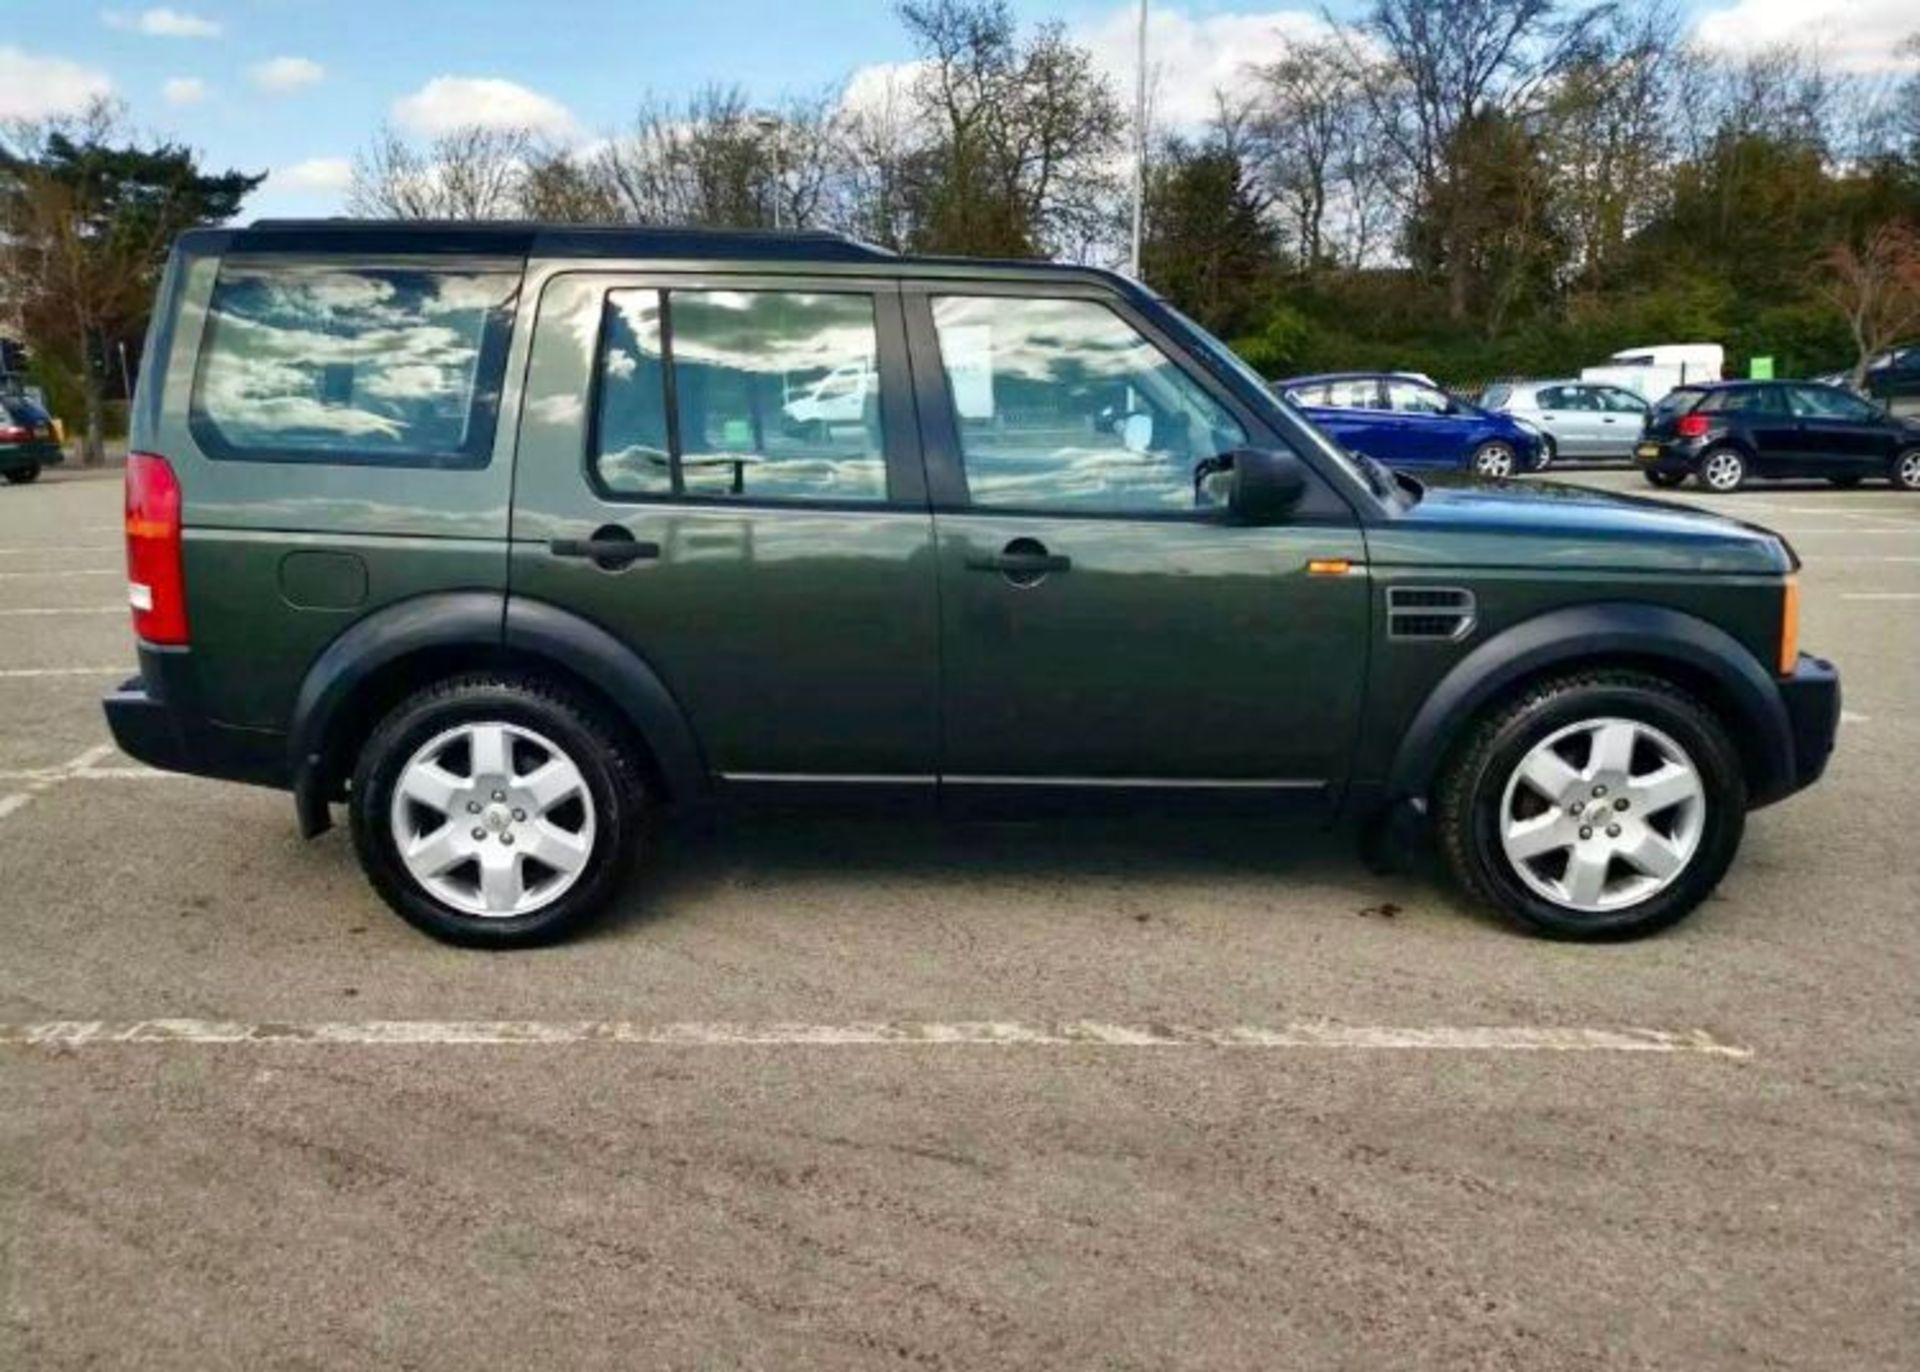 2006 LAND ROVER DISCOVERY 3 TDV6 AUTO GREEN ESTATE - LEATHER SEATS *NO VAT* - Image 4 of 11